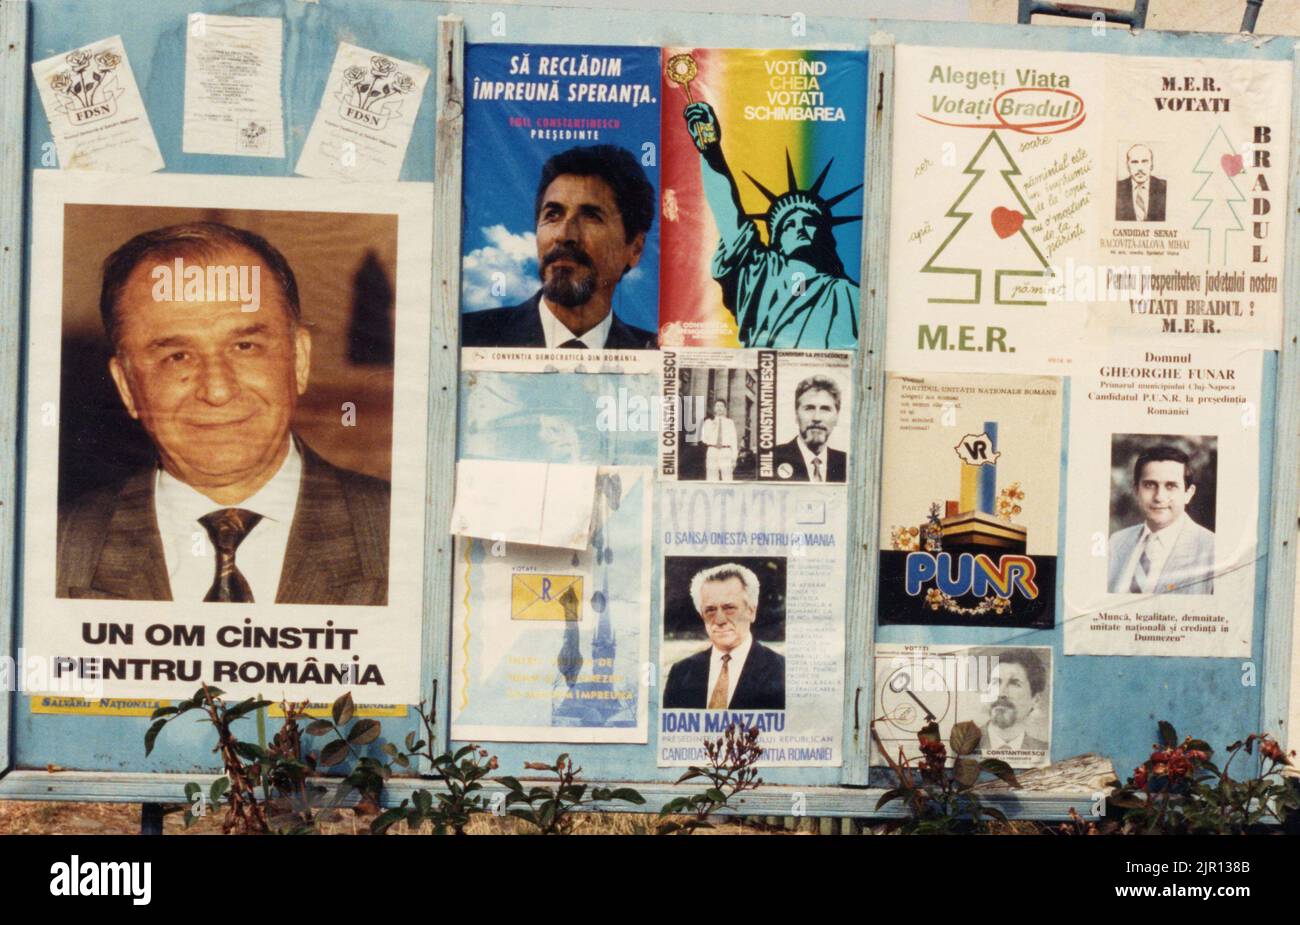 Romania, 1992. Electoral posters in public place before the presidential elections. Stock Photo